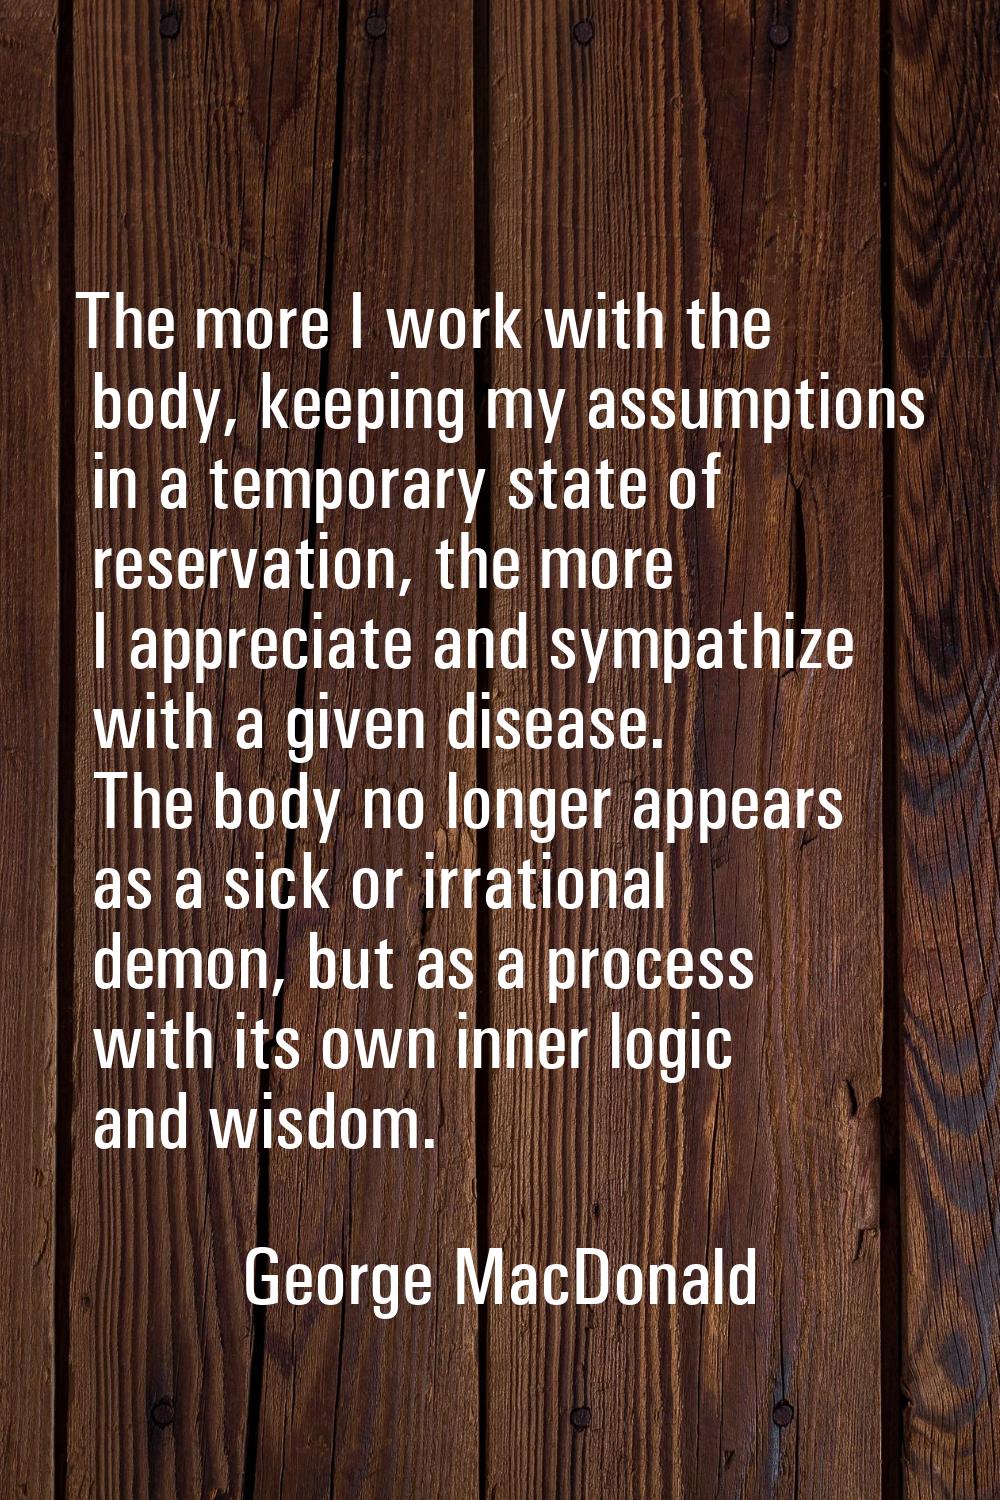 The more I work with the body, keeping my assumptions in a temporary state of reservation, the more